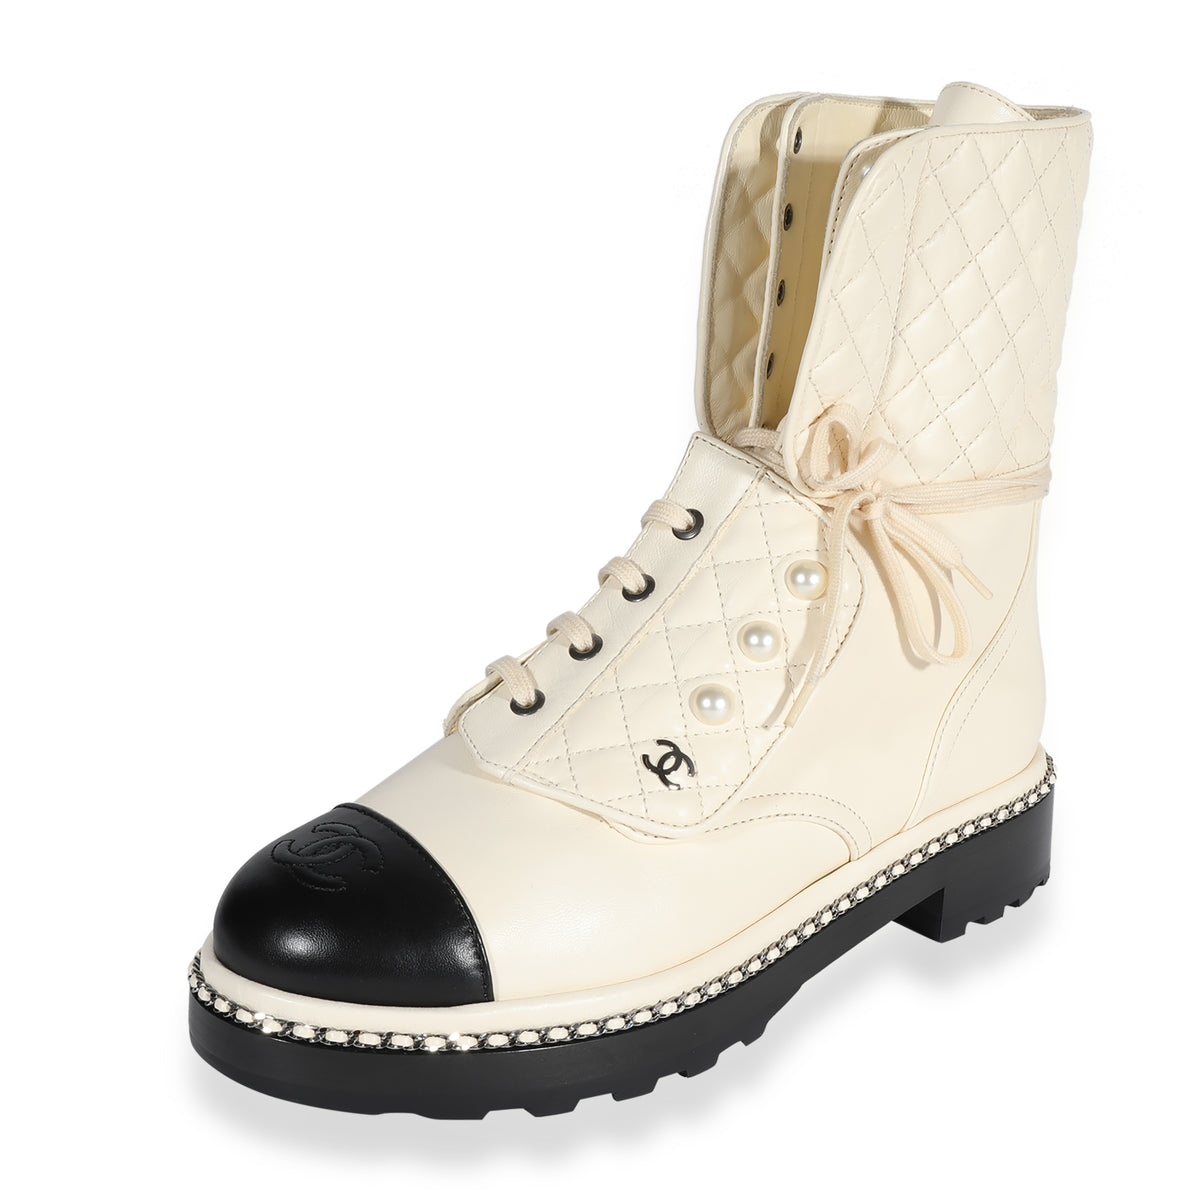 Chanel Shearling Chain Snow boots Boots  Designer Exchange  Buy Sell  Exchange